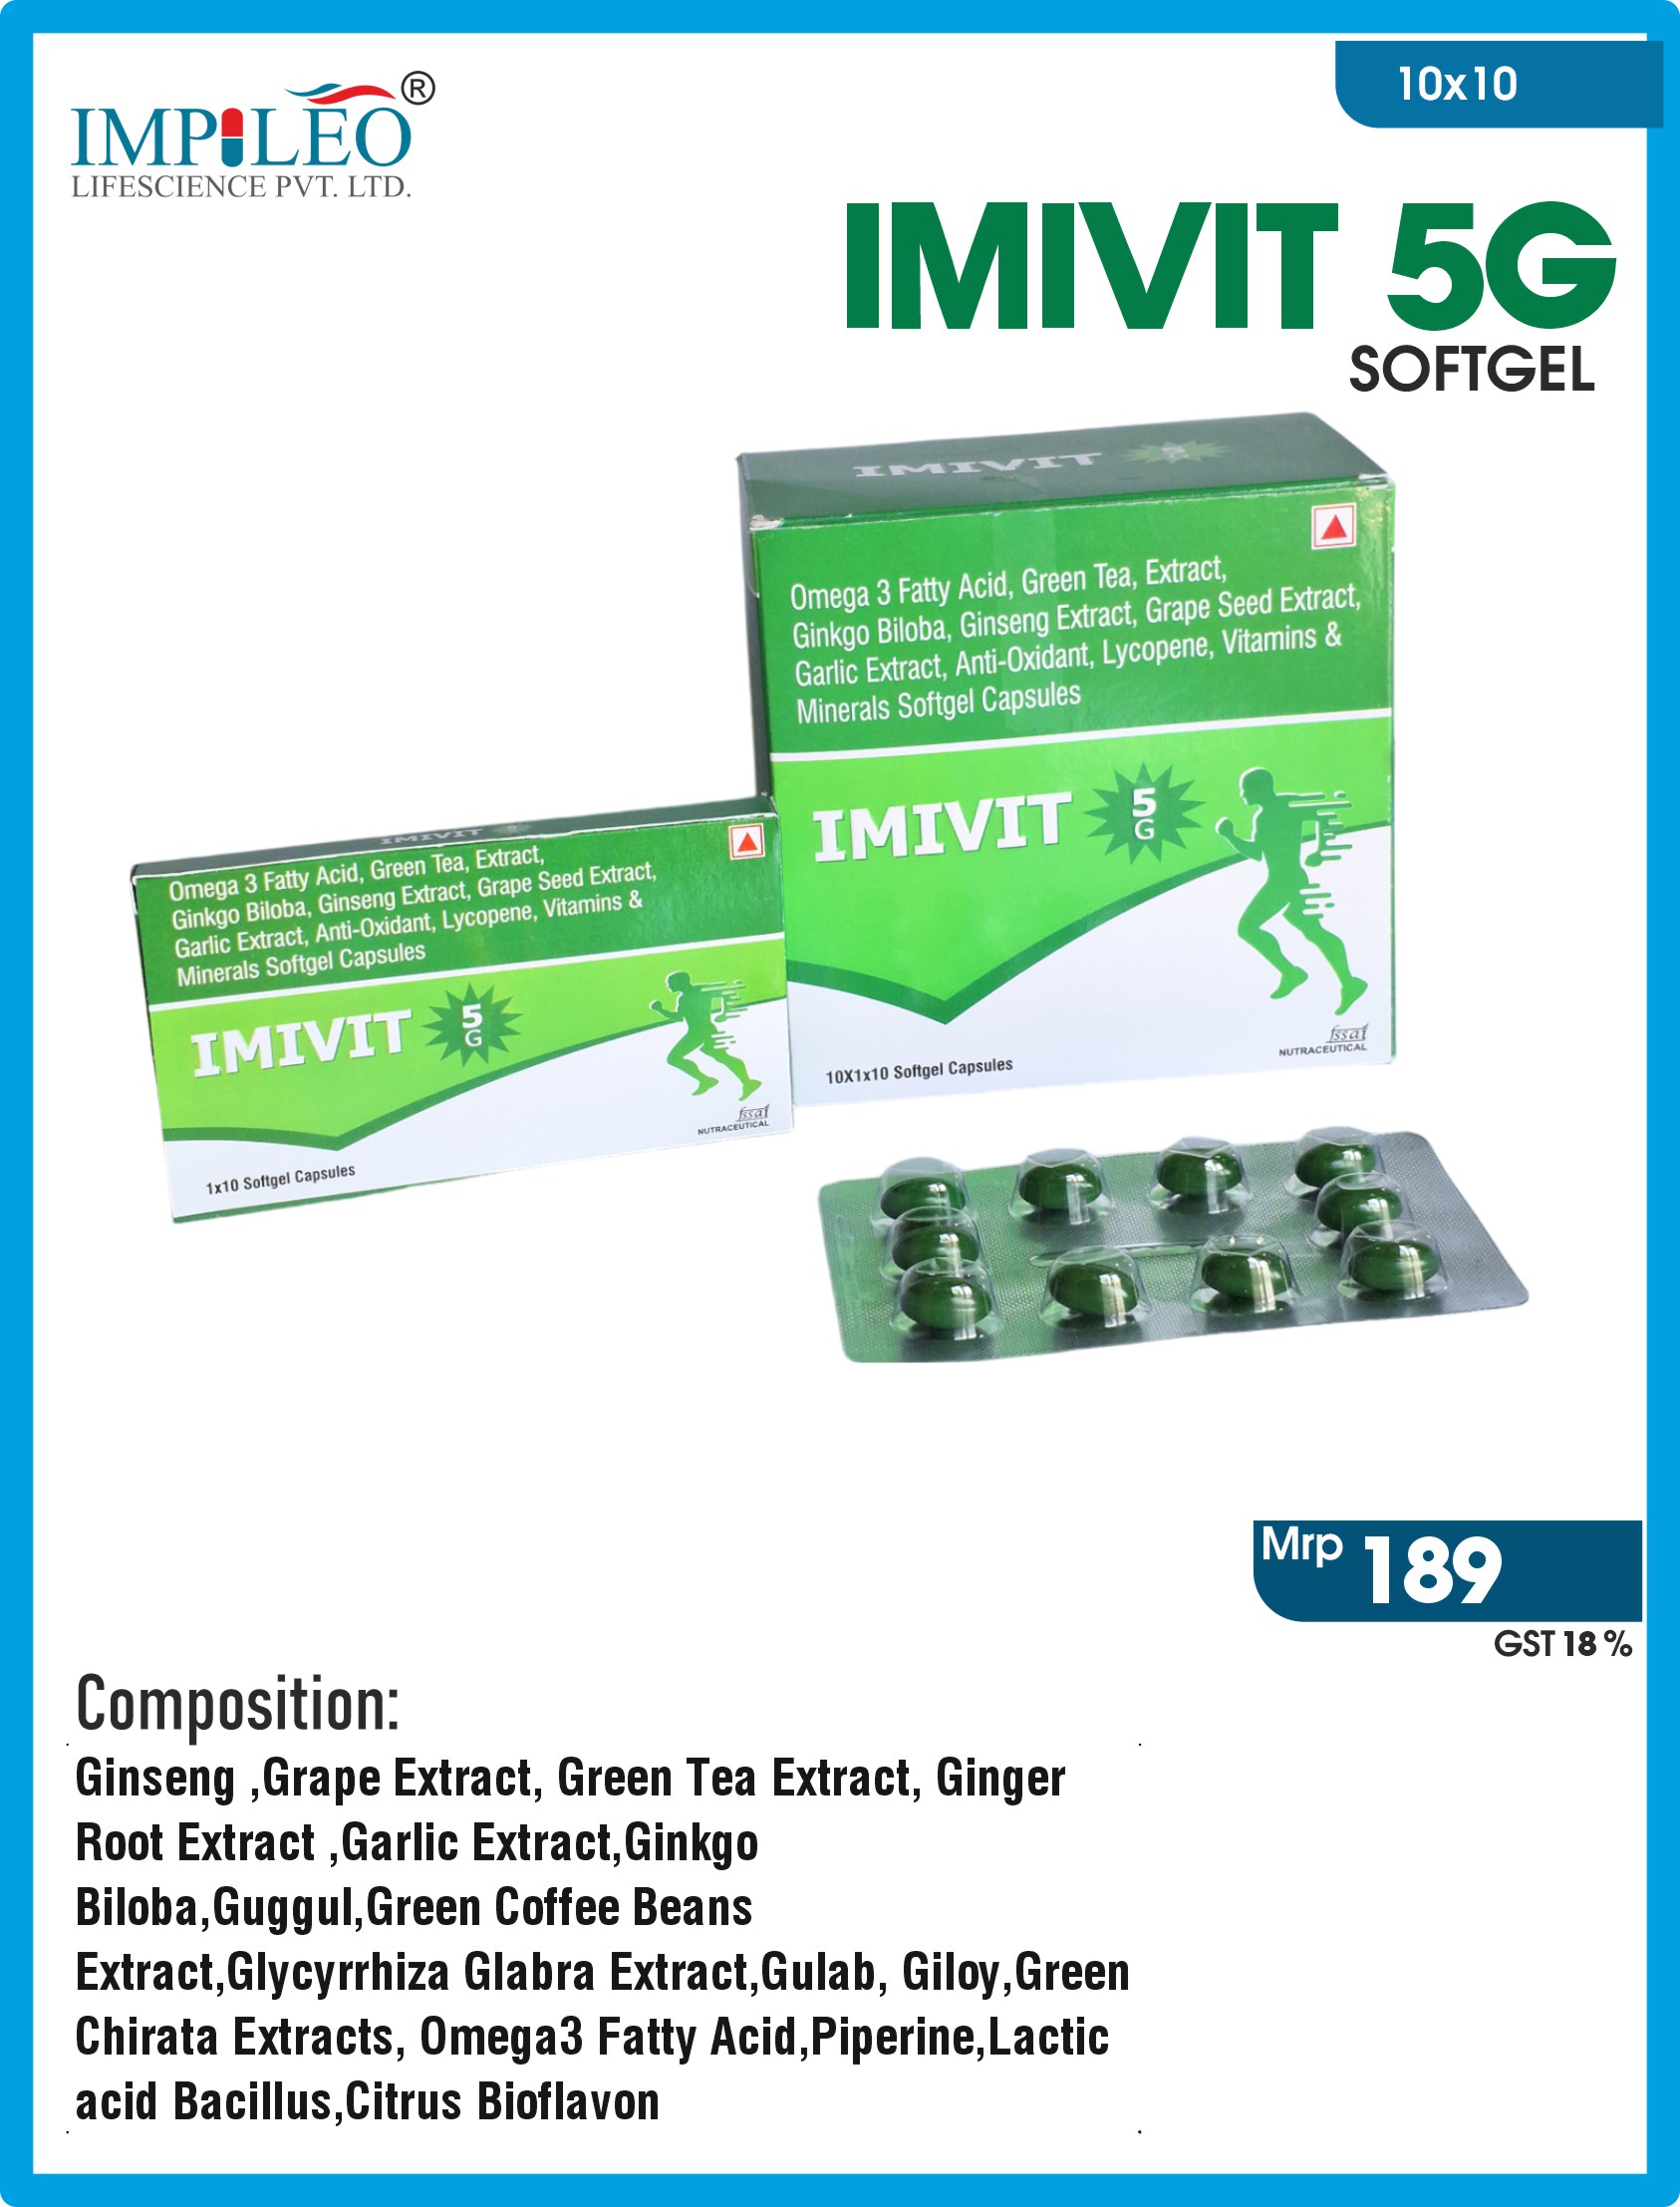 Reliable Production Partners: IMIVIT 5G Softgel Capsules by Third Party Manufacturing in India